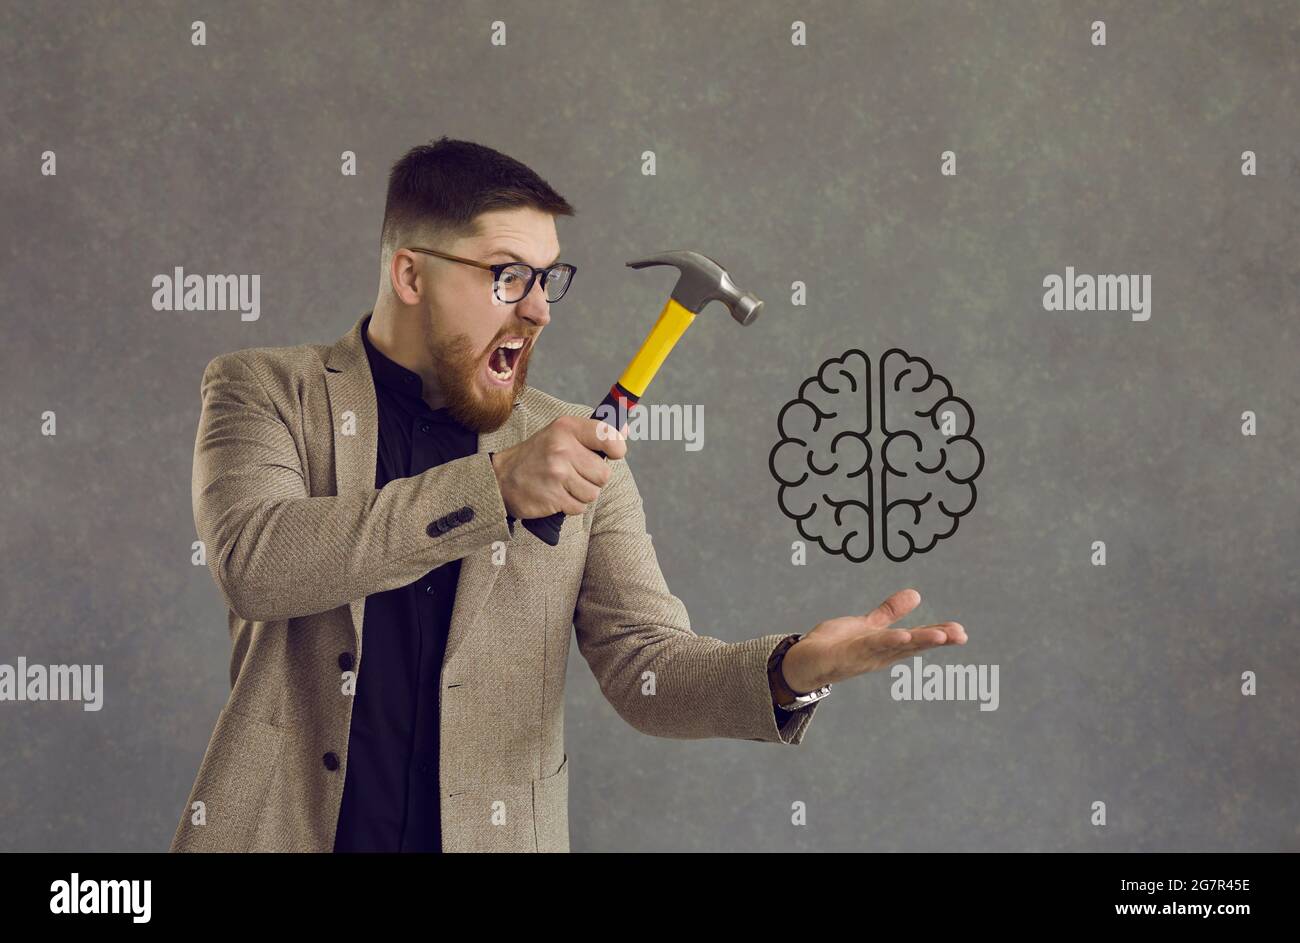 Angry man experiencing mental disorder, stress, or lack of creativity hitting brain with hammer Stock Photo